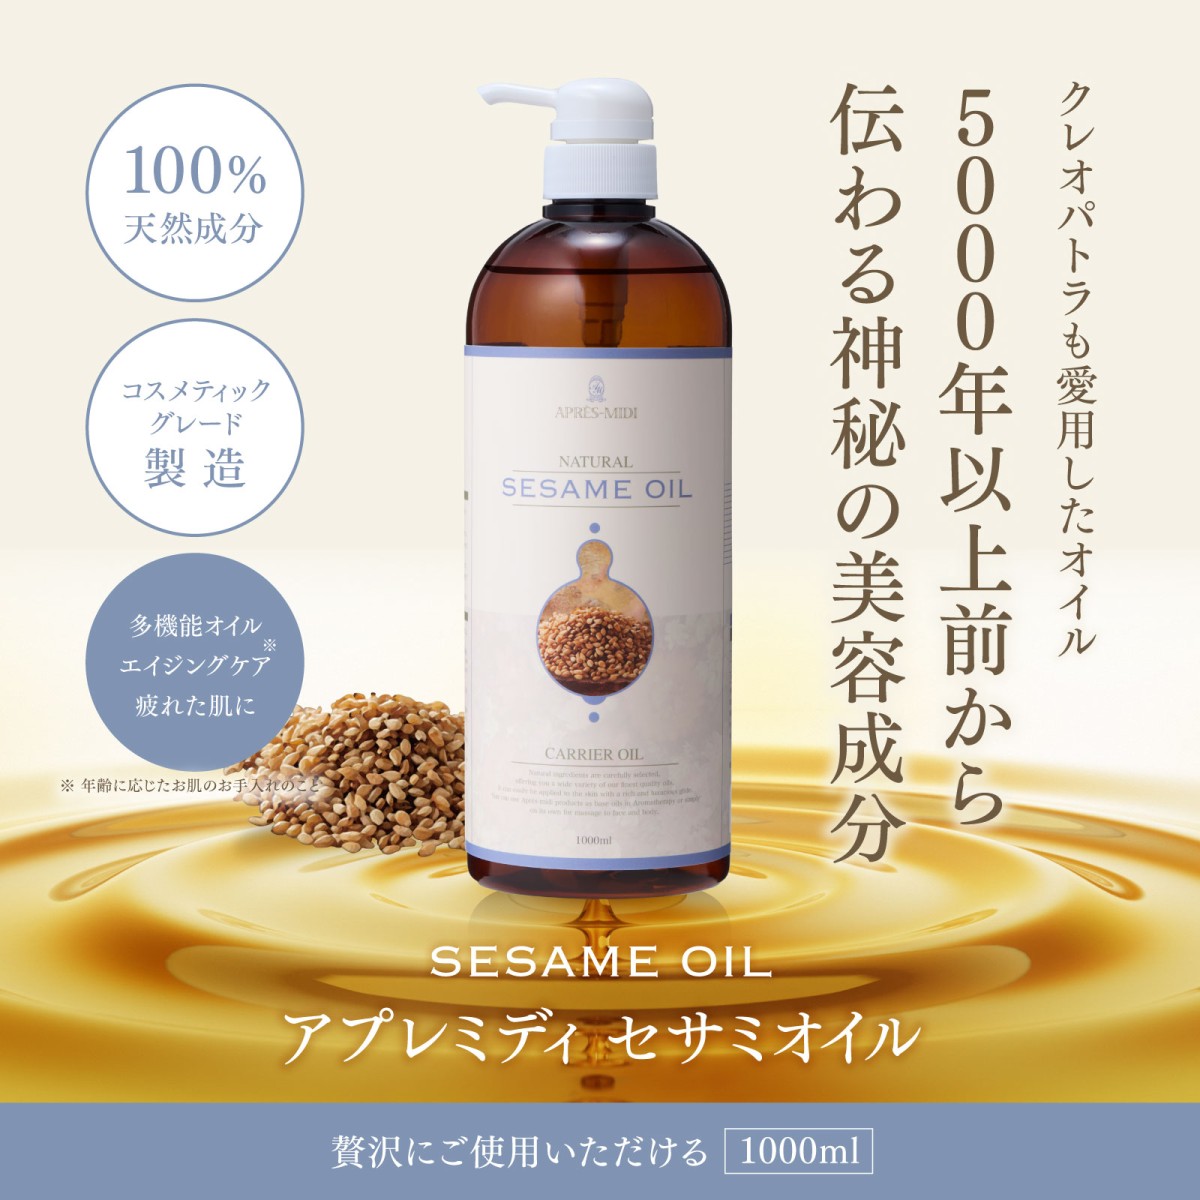  sesame oil [ free shipping ] 1000mla pre midi carrier oil [ natural 100%] no addition towa Tec massage oil base oil aroma high capacity business use 